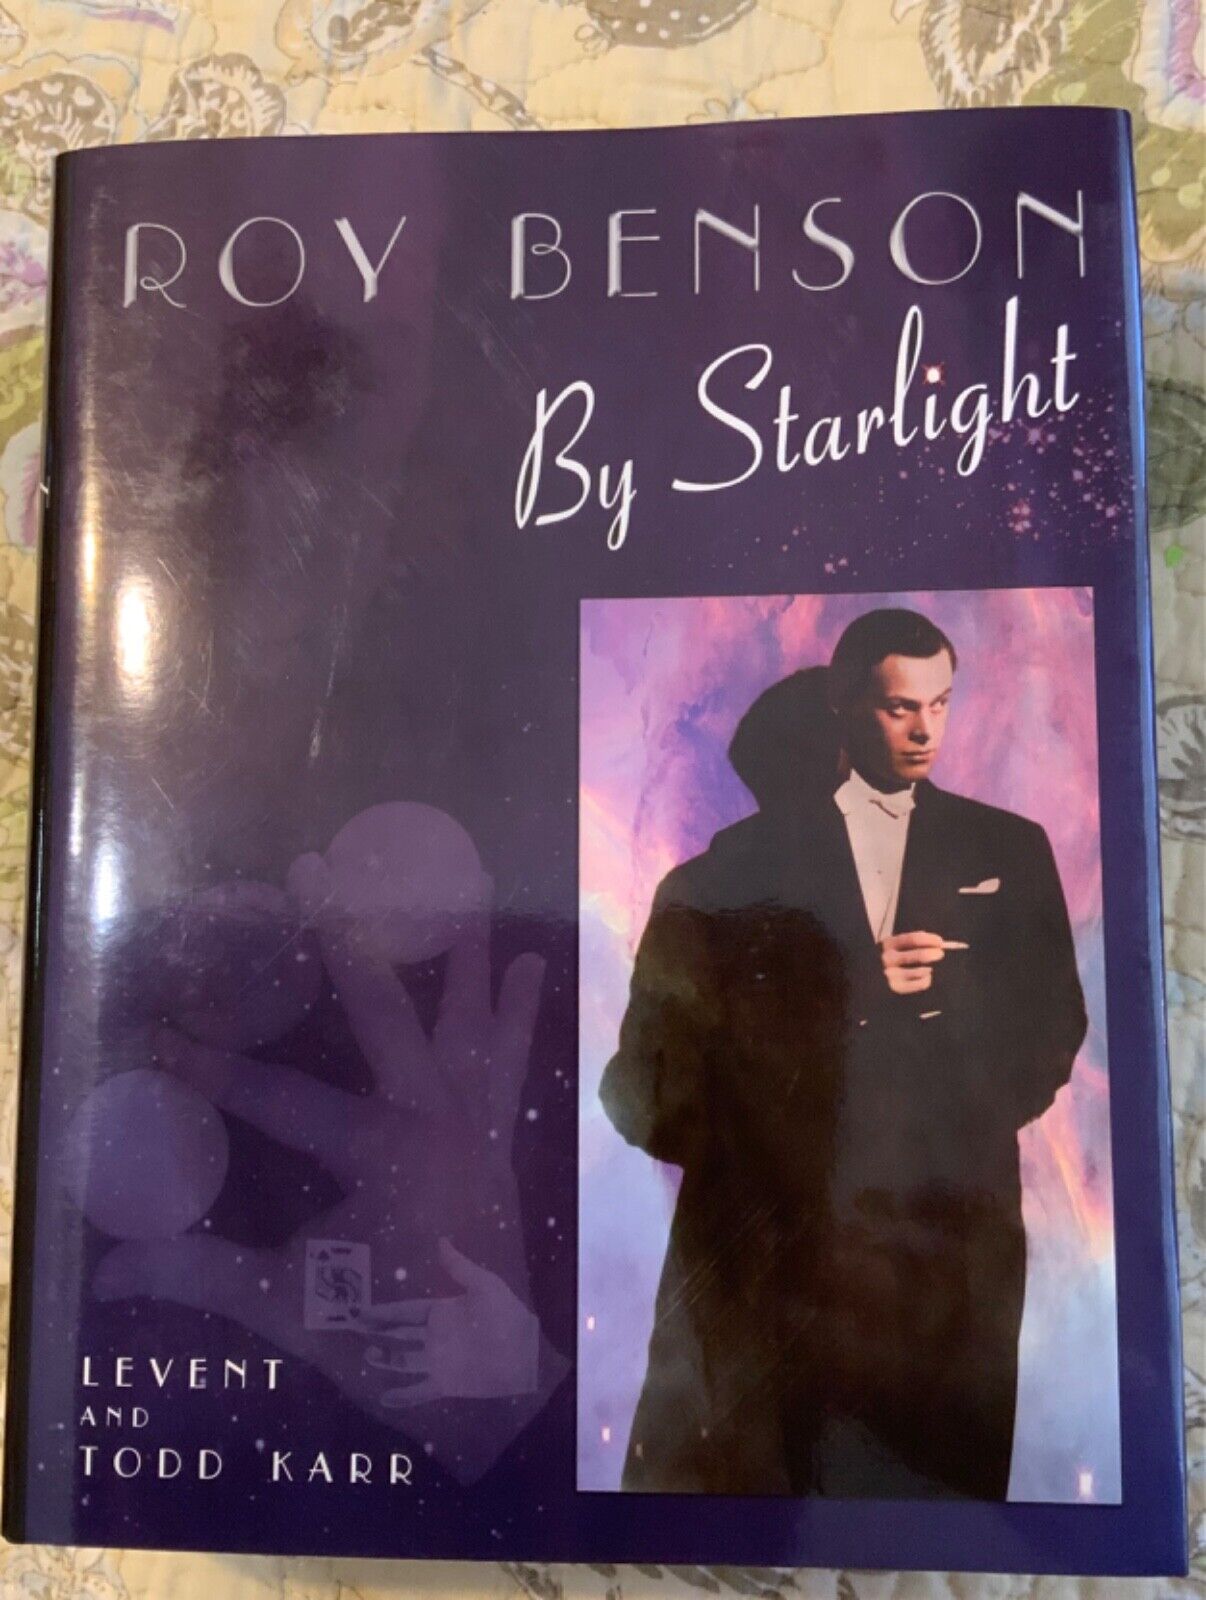 Roy Benson By Starlight, by Levent and Todd Karr, SIGNED